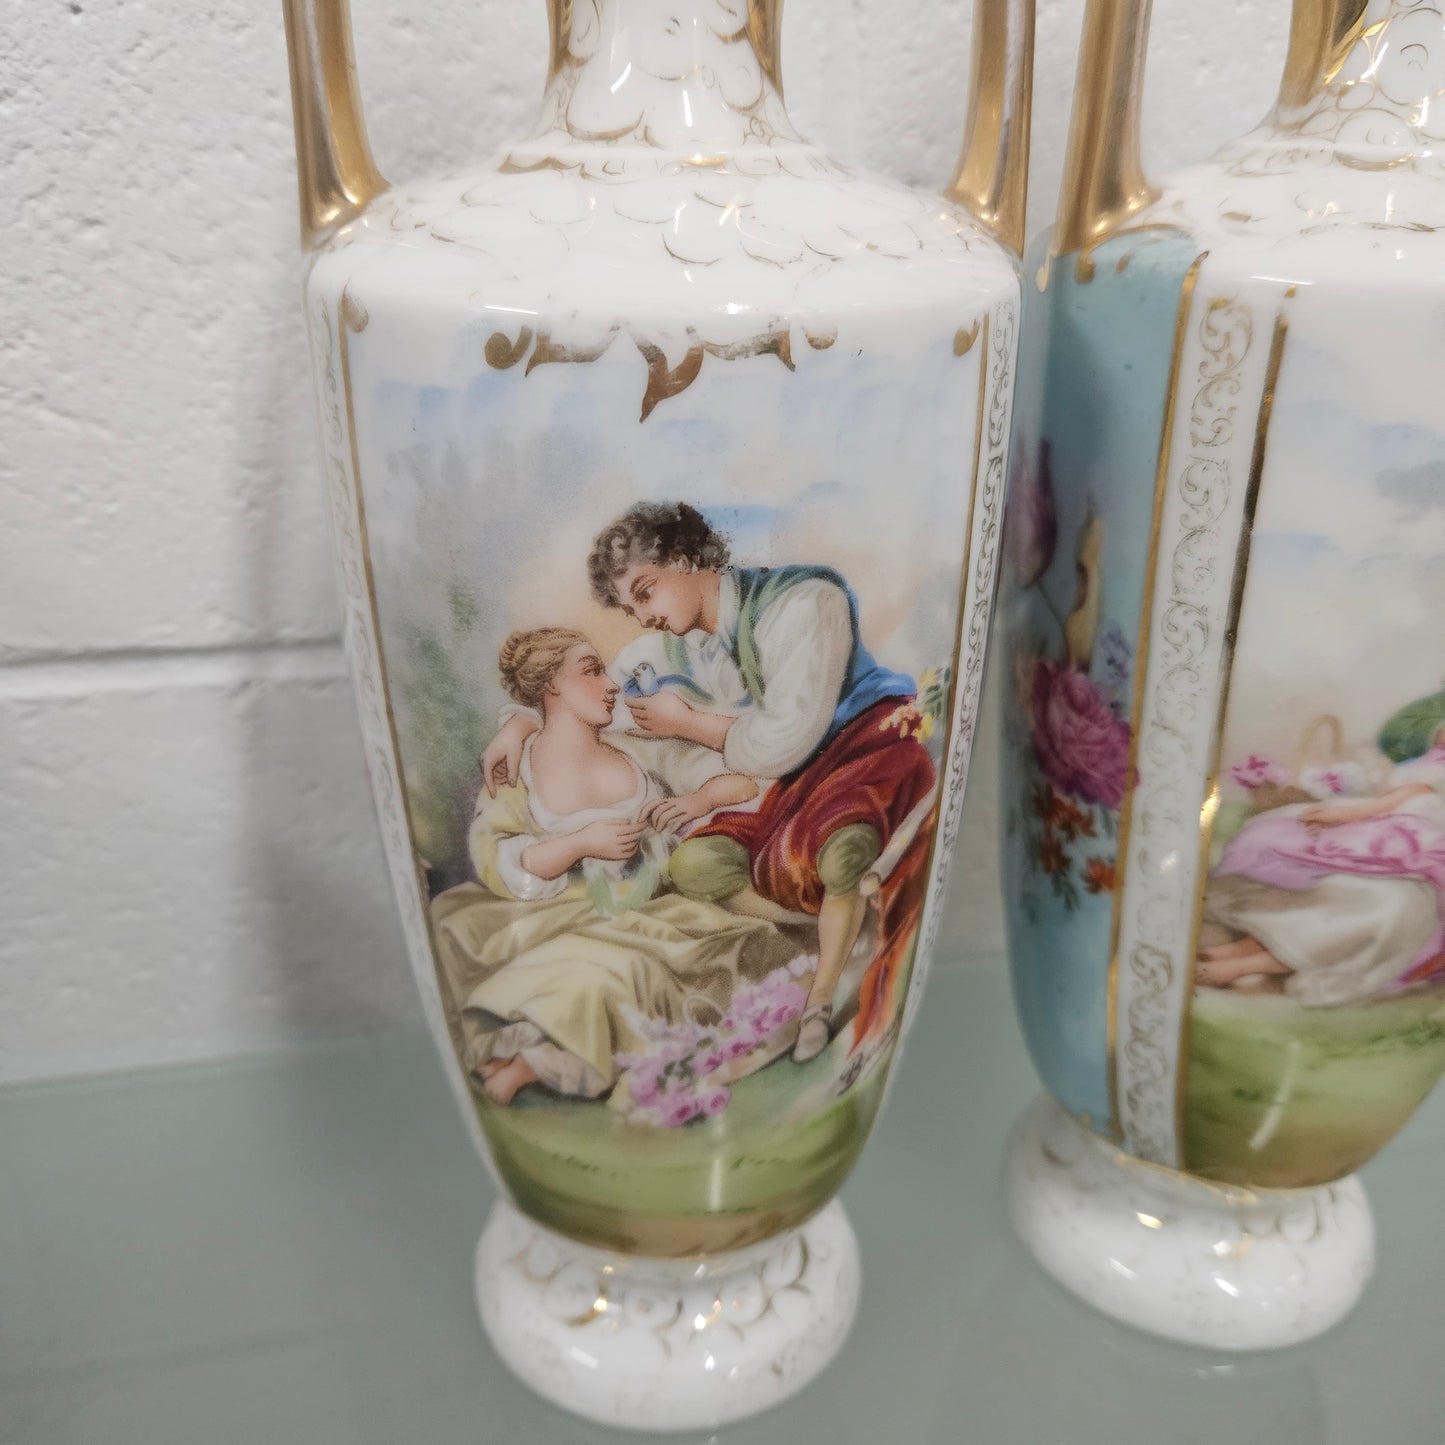 Lovely Pair Of Antique Vases